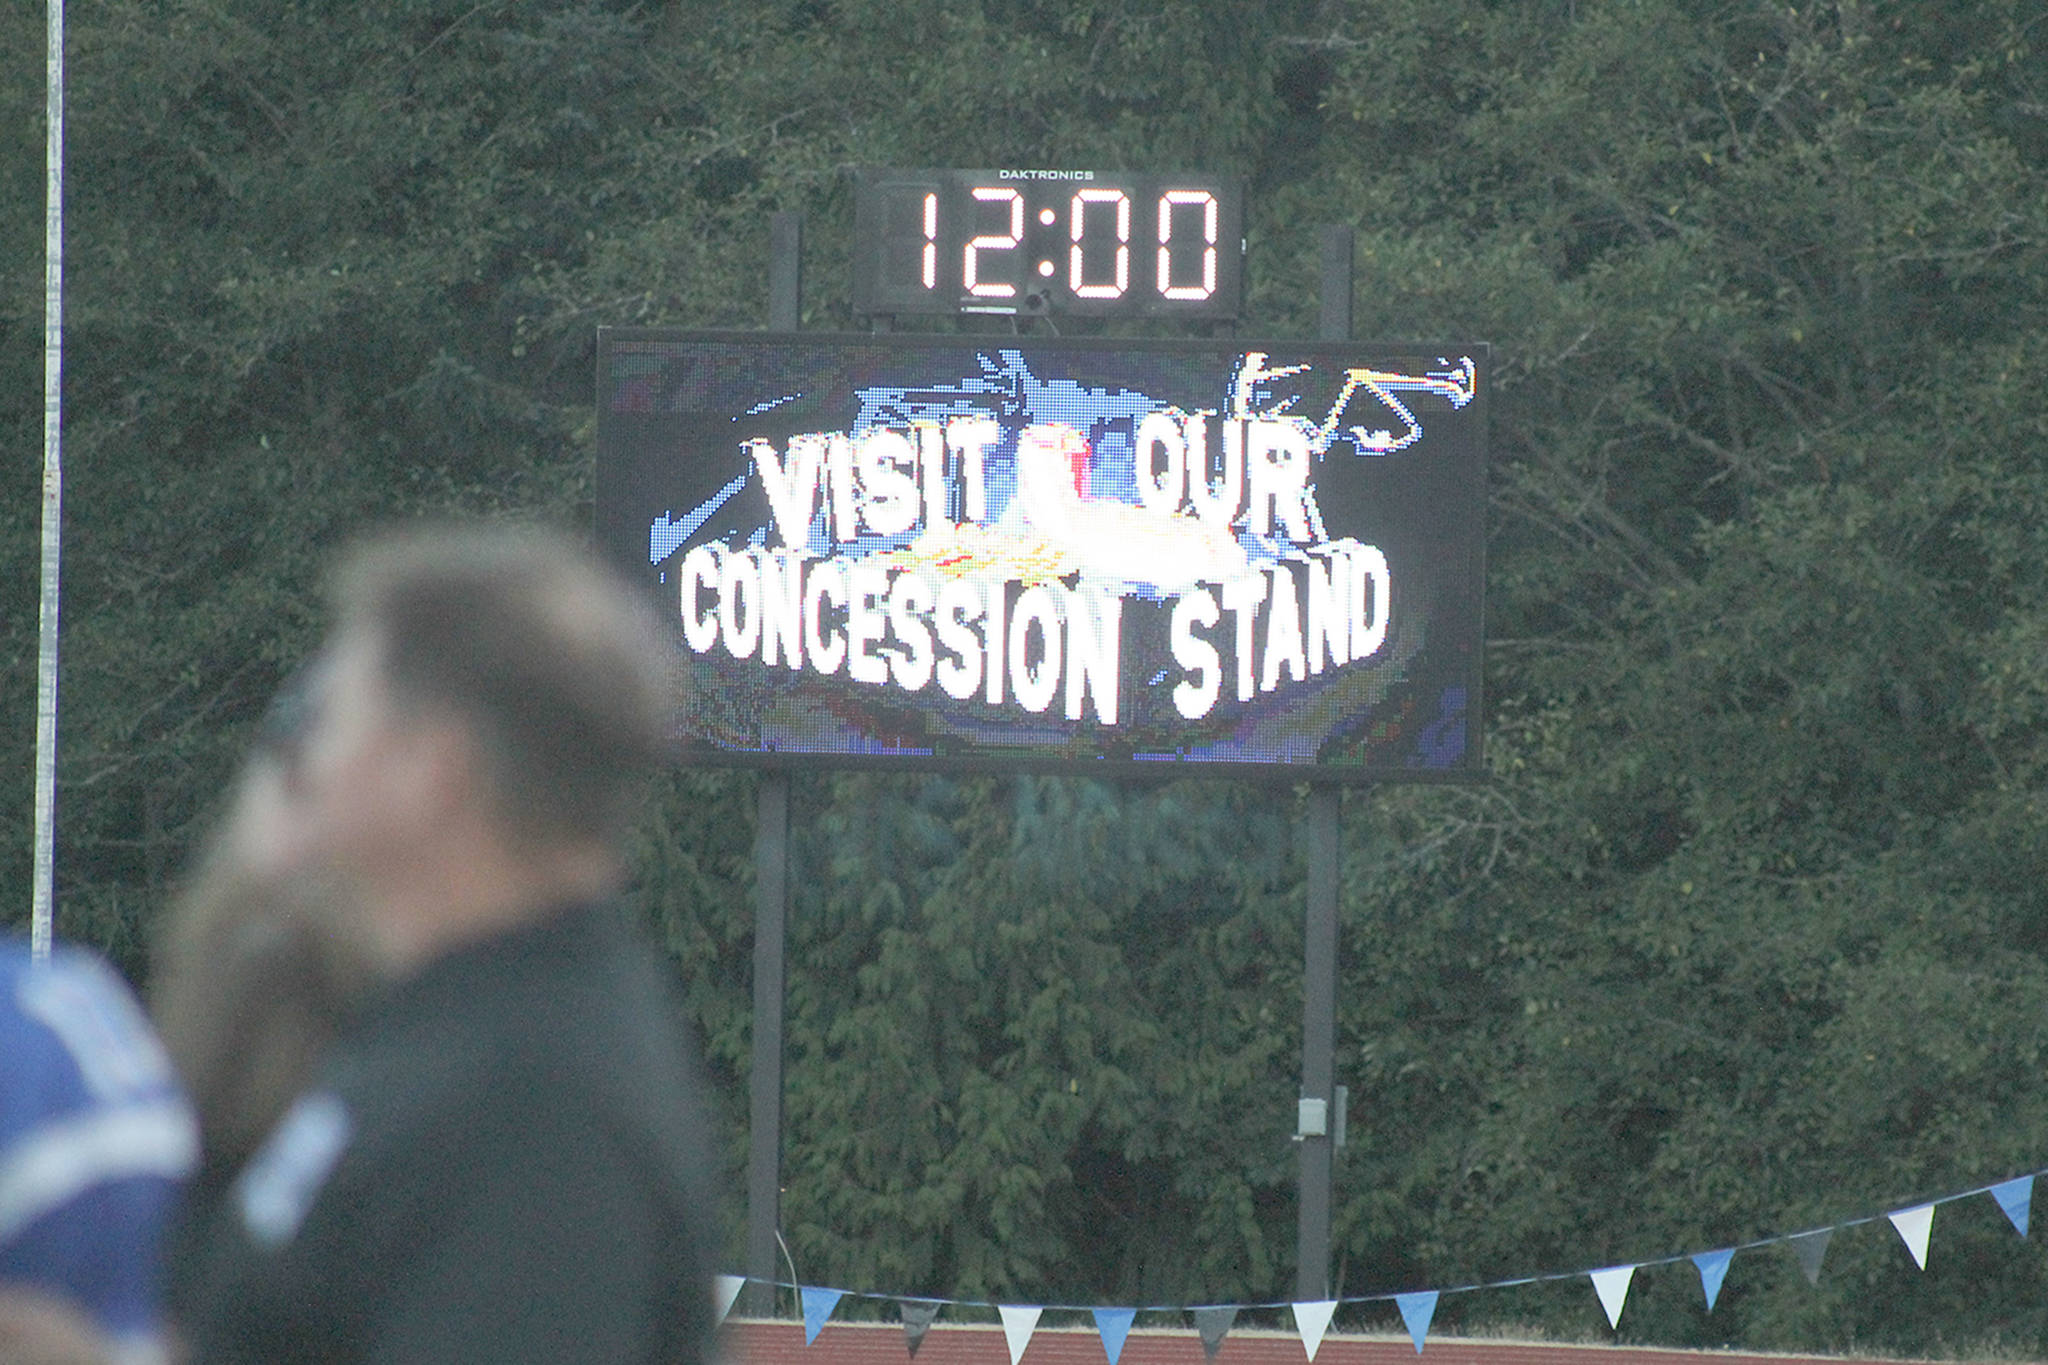 New scoreboard seen in action at South Whidbey football game